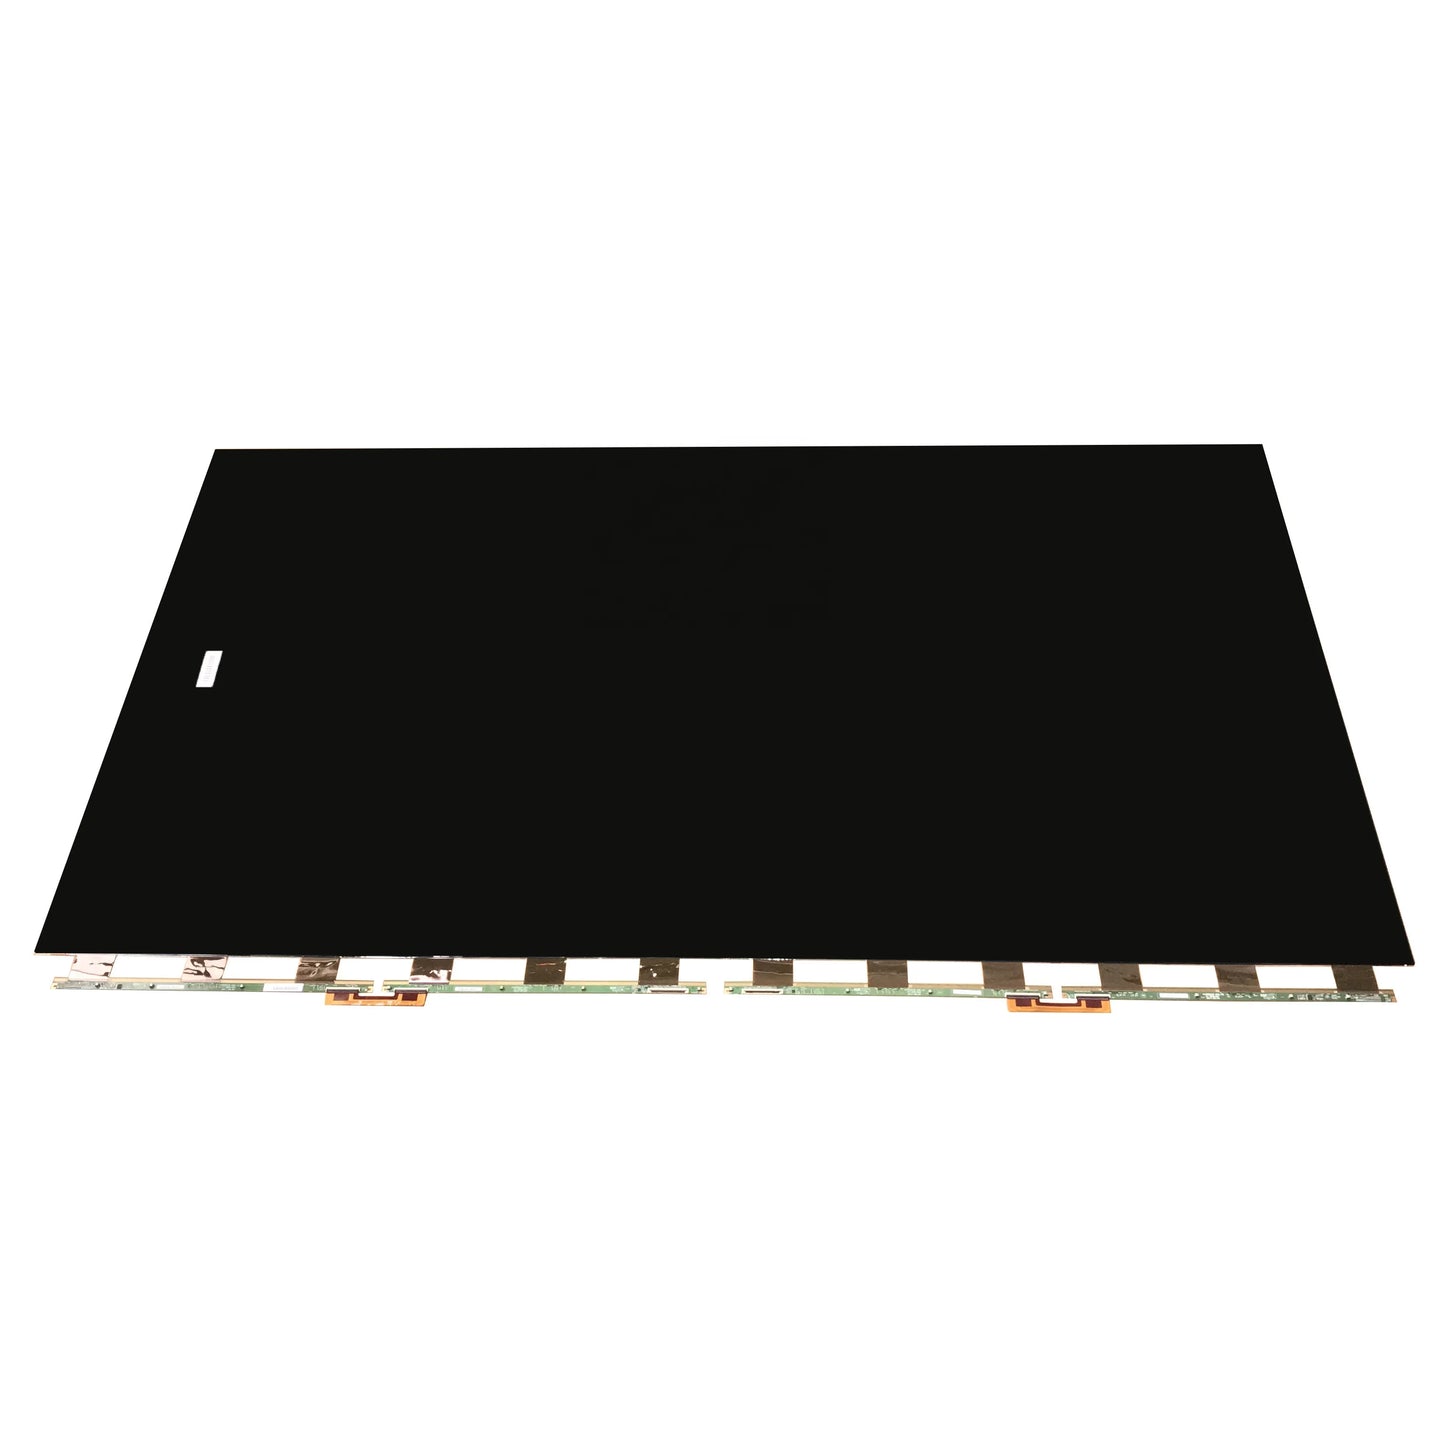 HV650QUB-N9D 136 pins BOE 65" inch LCD LED TFT Display Open Cell TV Screen Spare Panel Replacement Parts for TV Repair